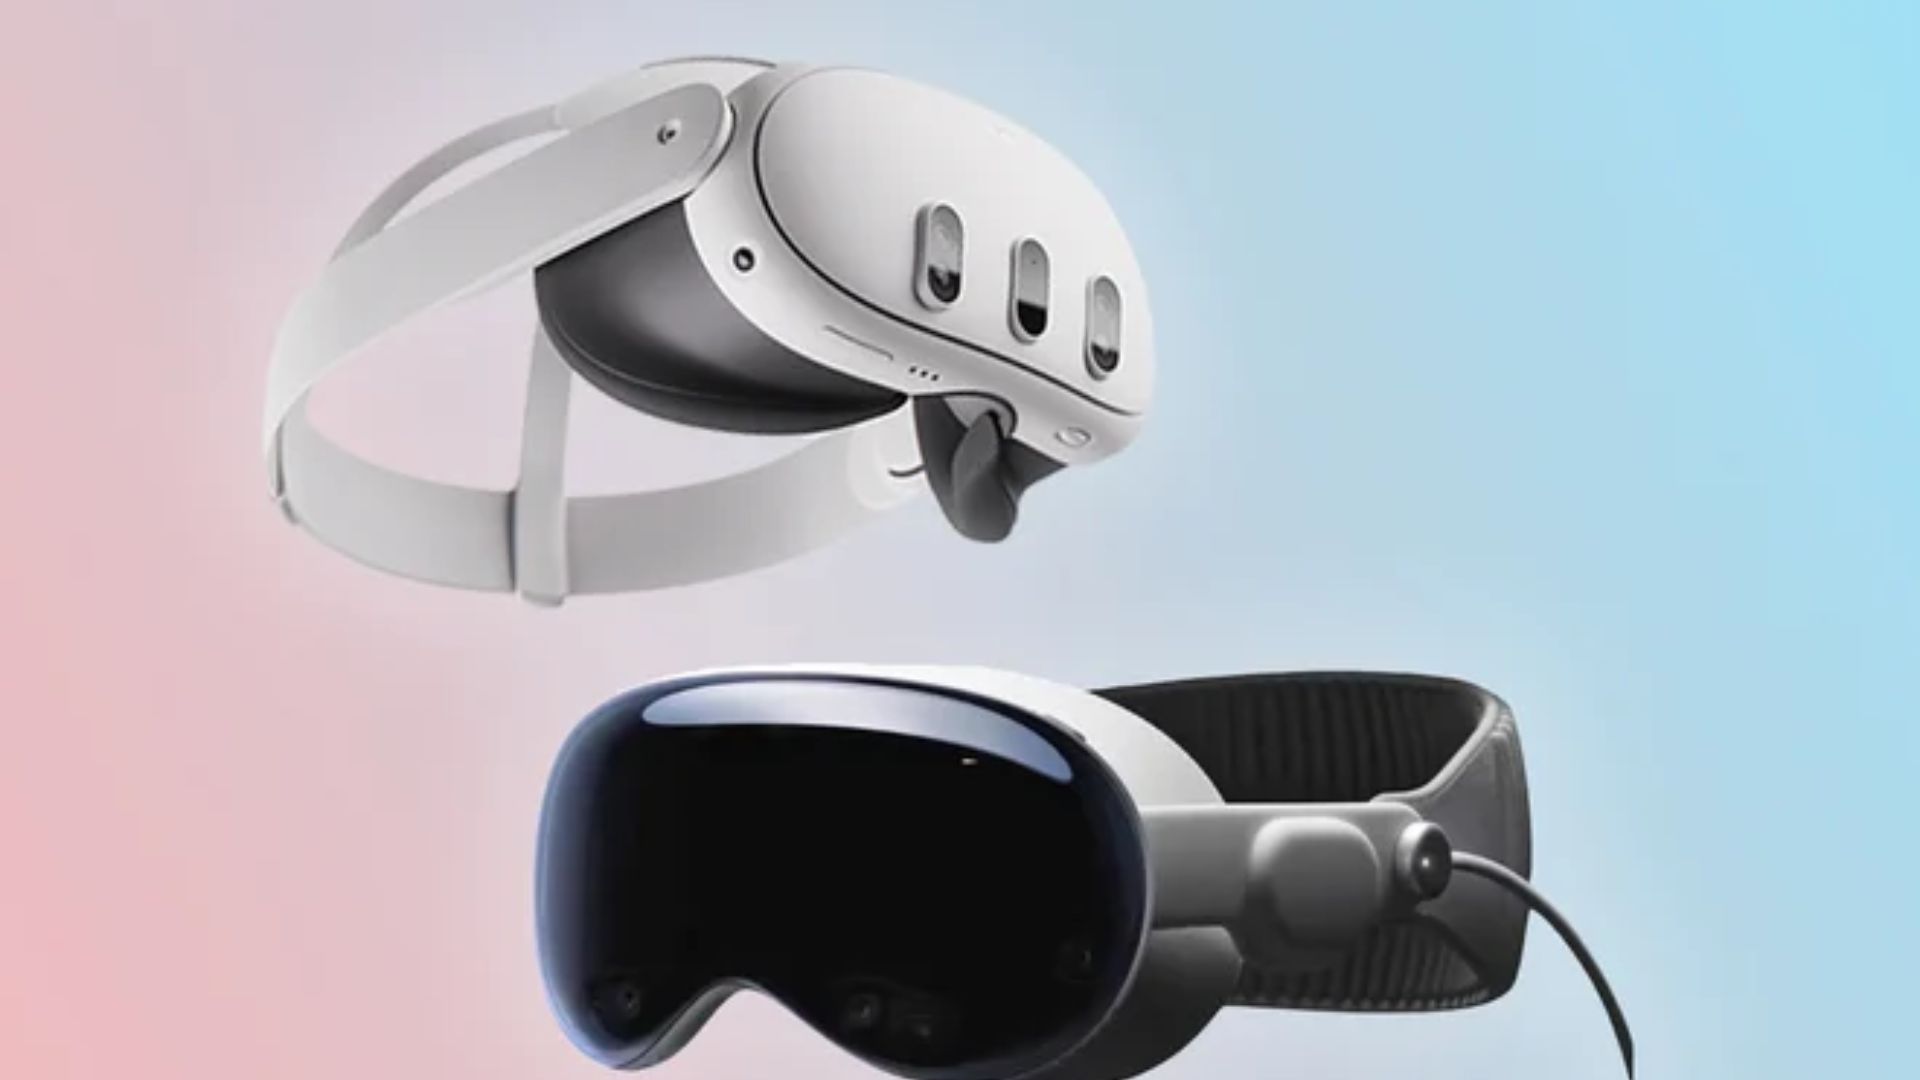 Apple vision pro vs. meta quest—how marketers view the competing headsets